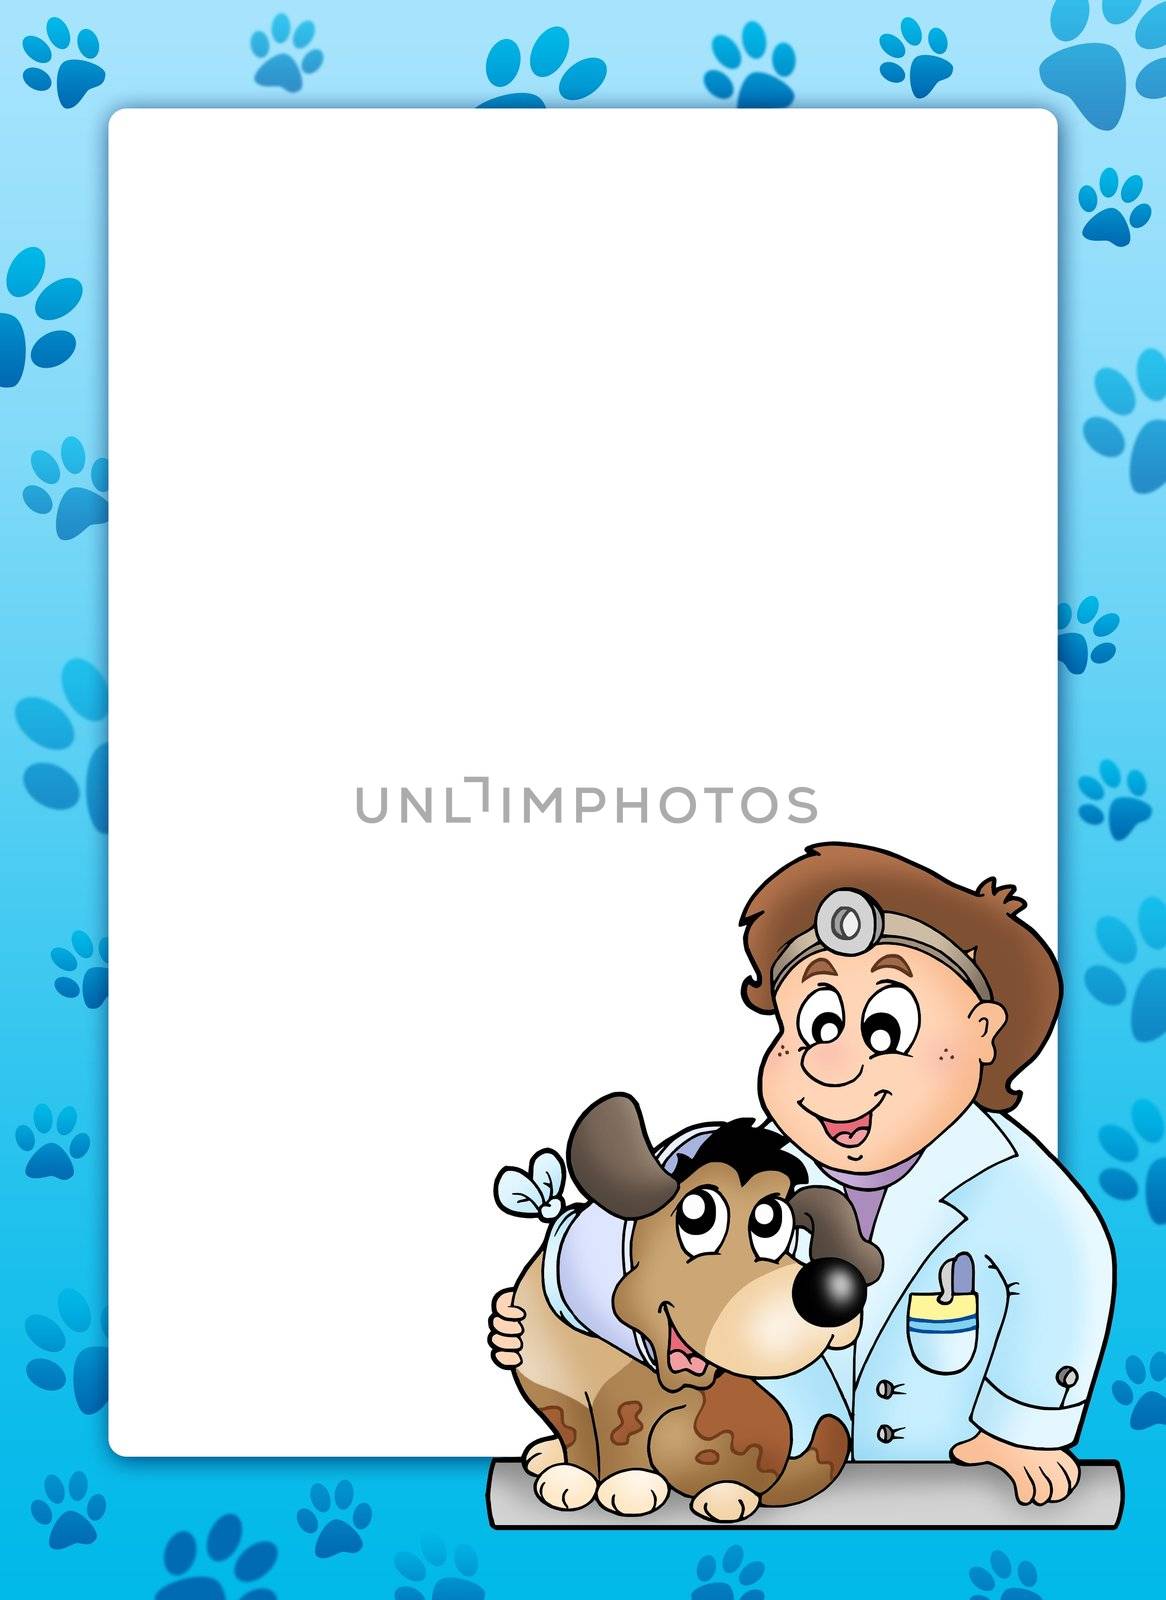 Blue frame with veterinary theme - color illustration.